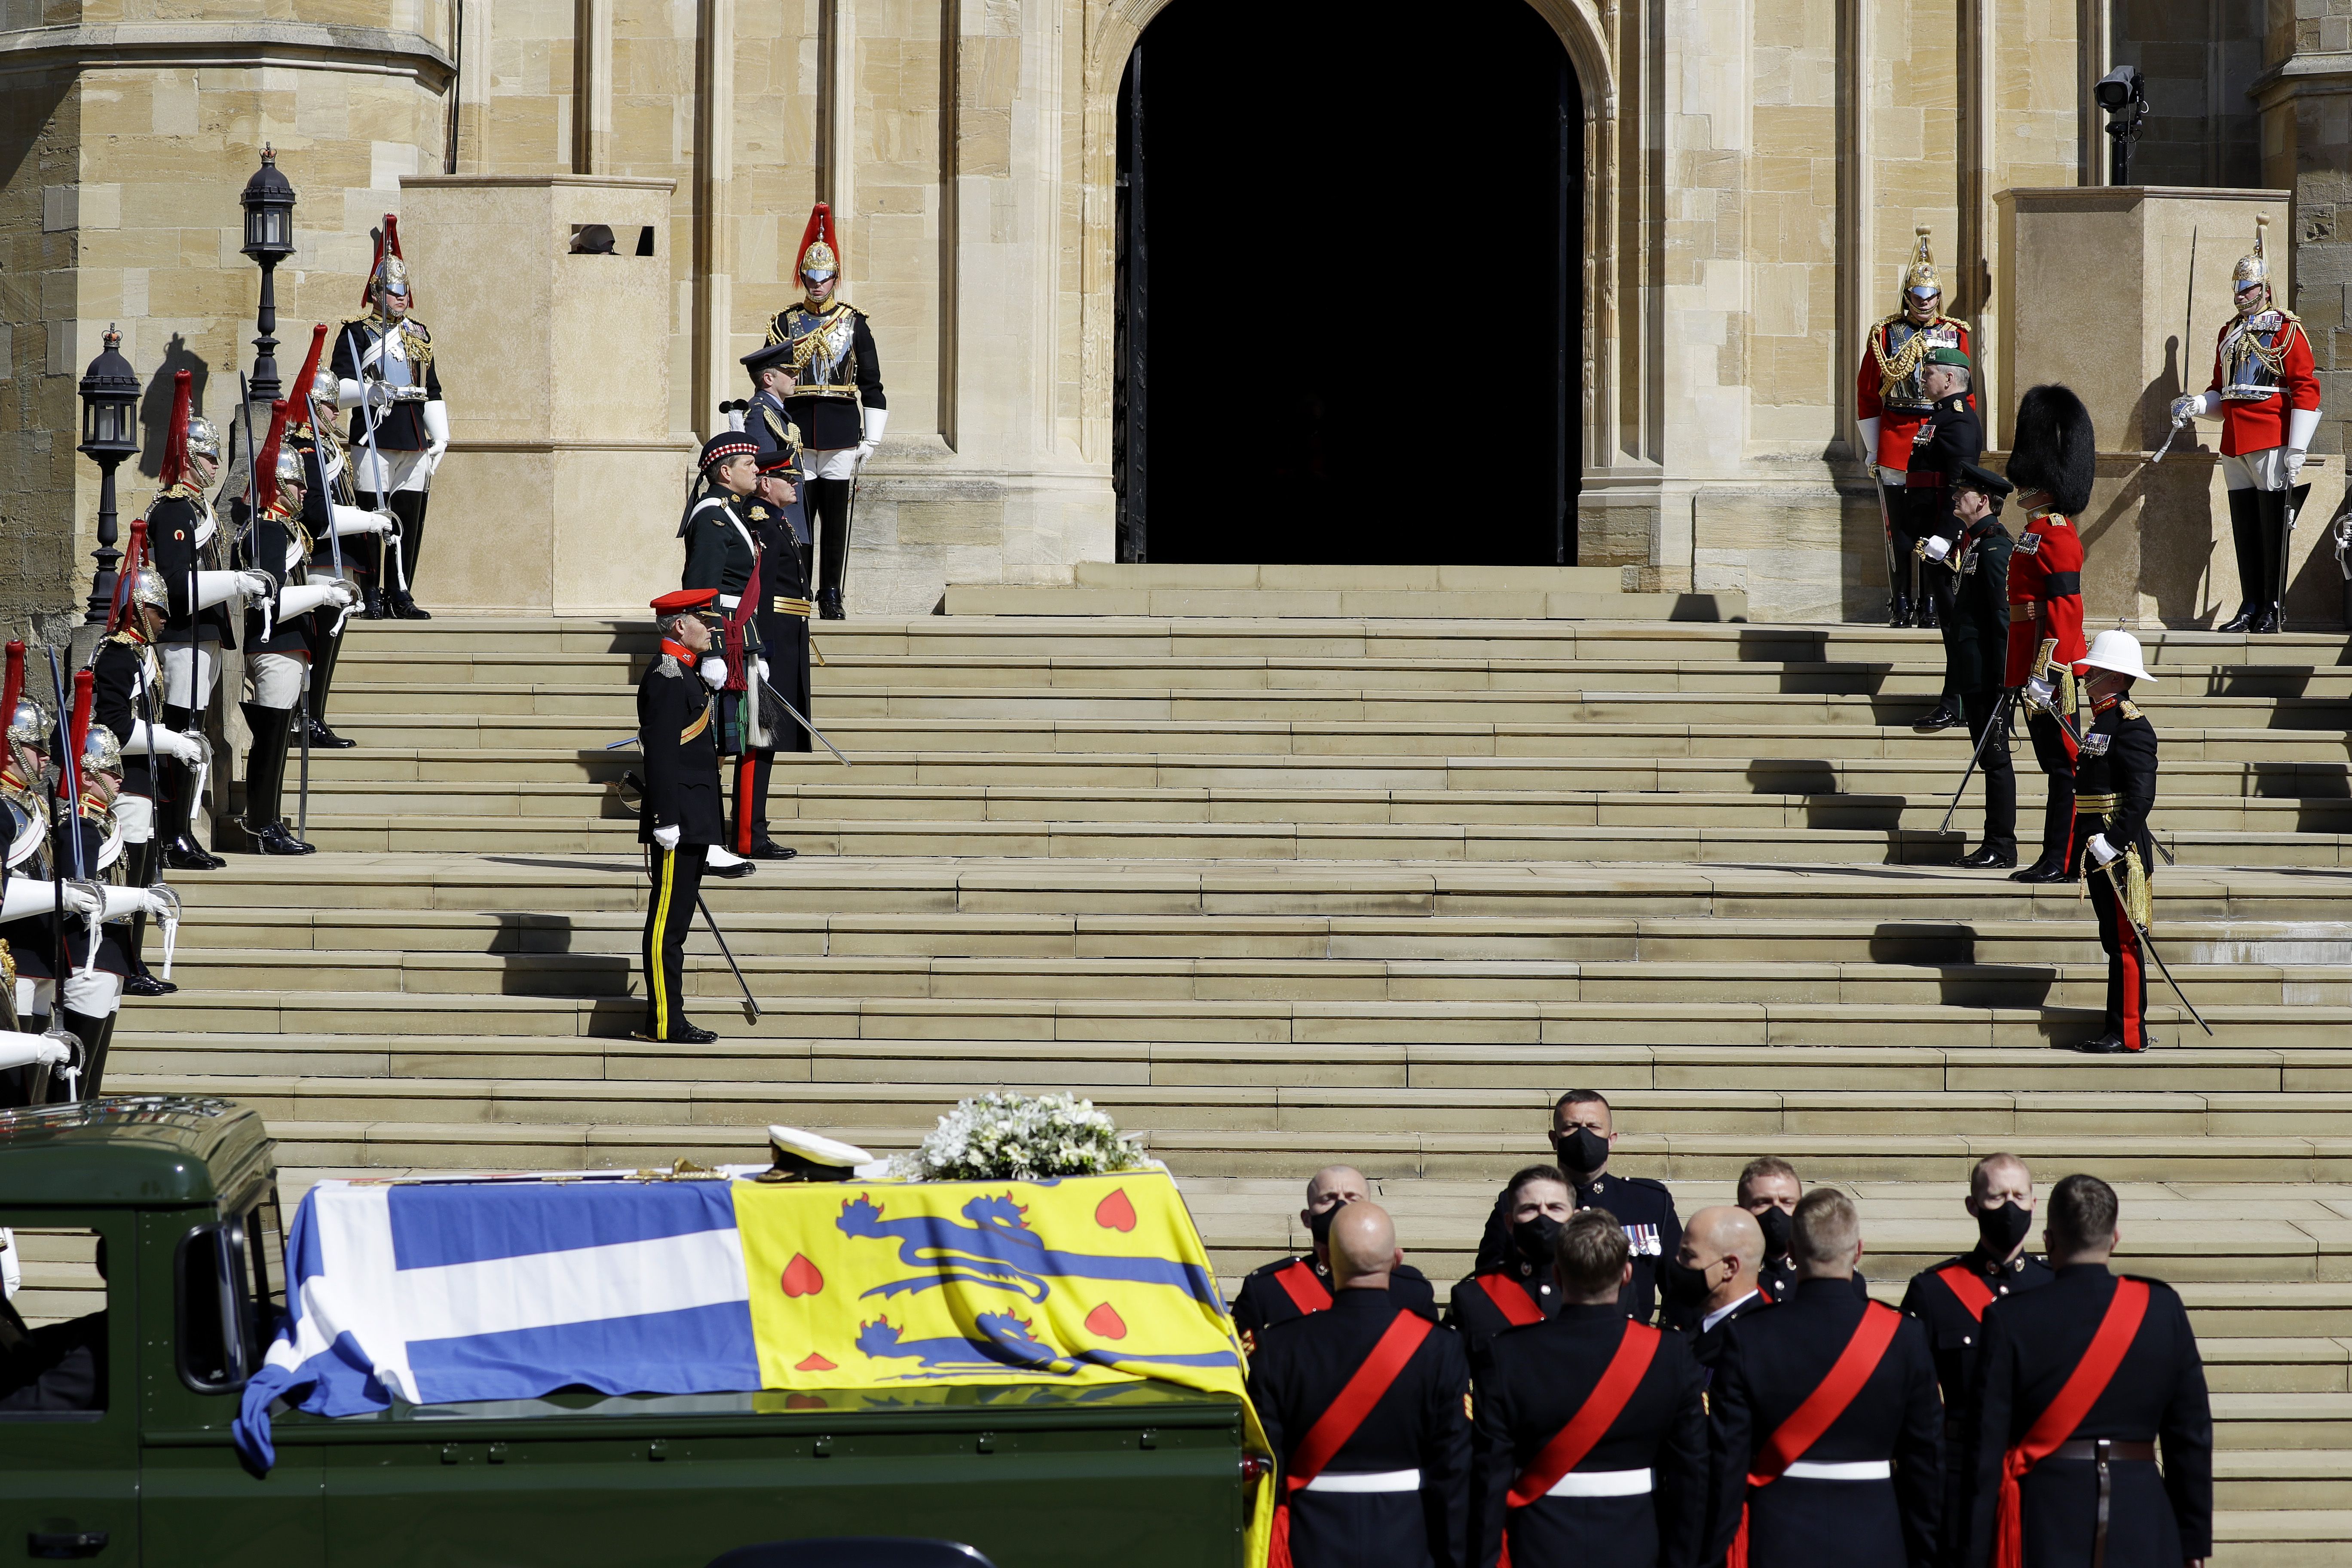 Photo of Prince Philip's coffin arriving to St. George's Chapel